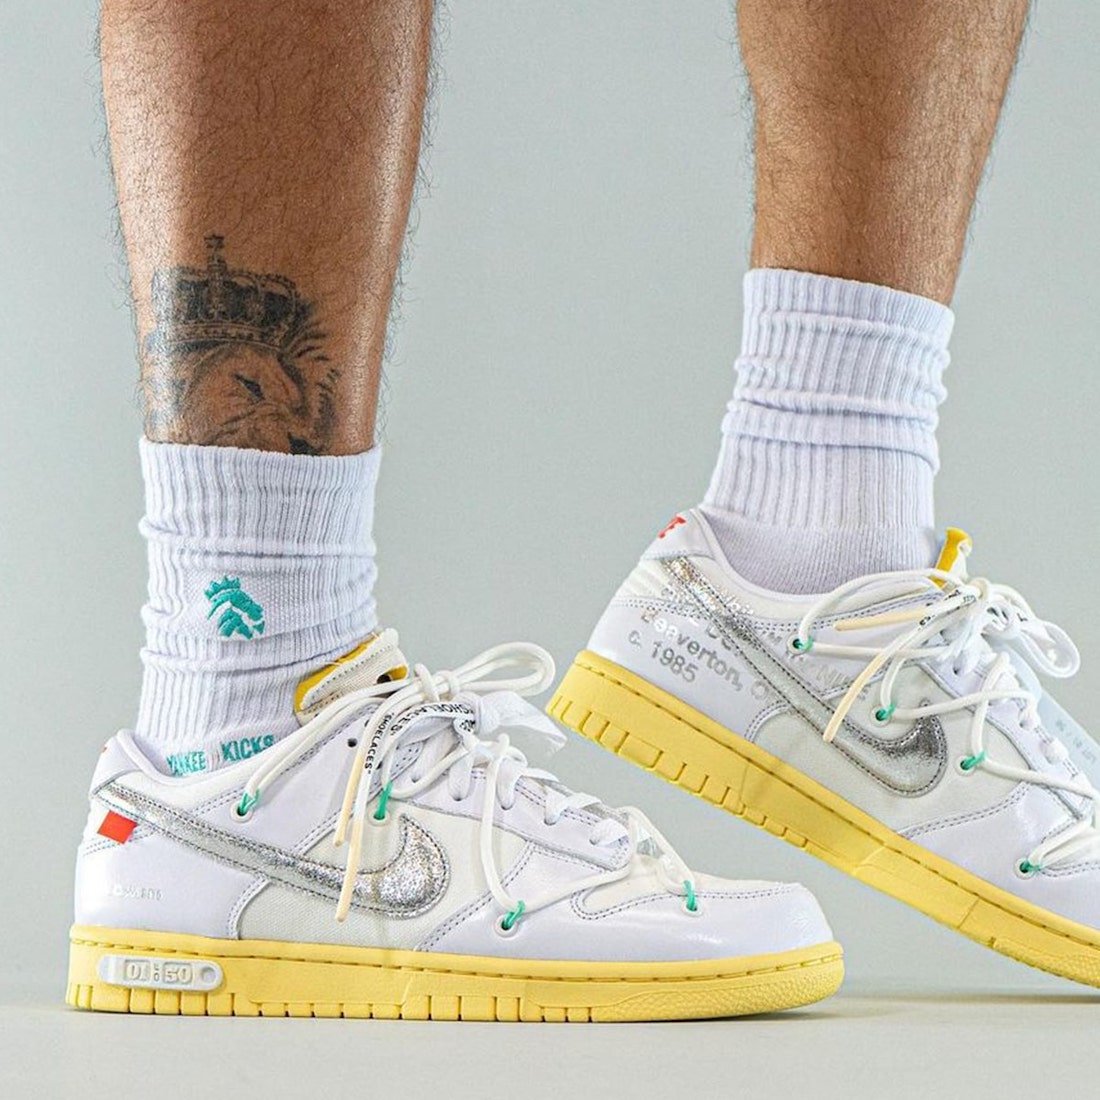 Off-White Nike Dunk Low Lot 1 On-Feet